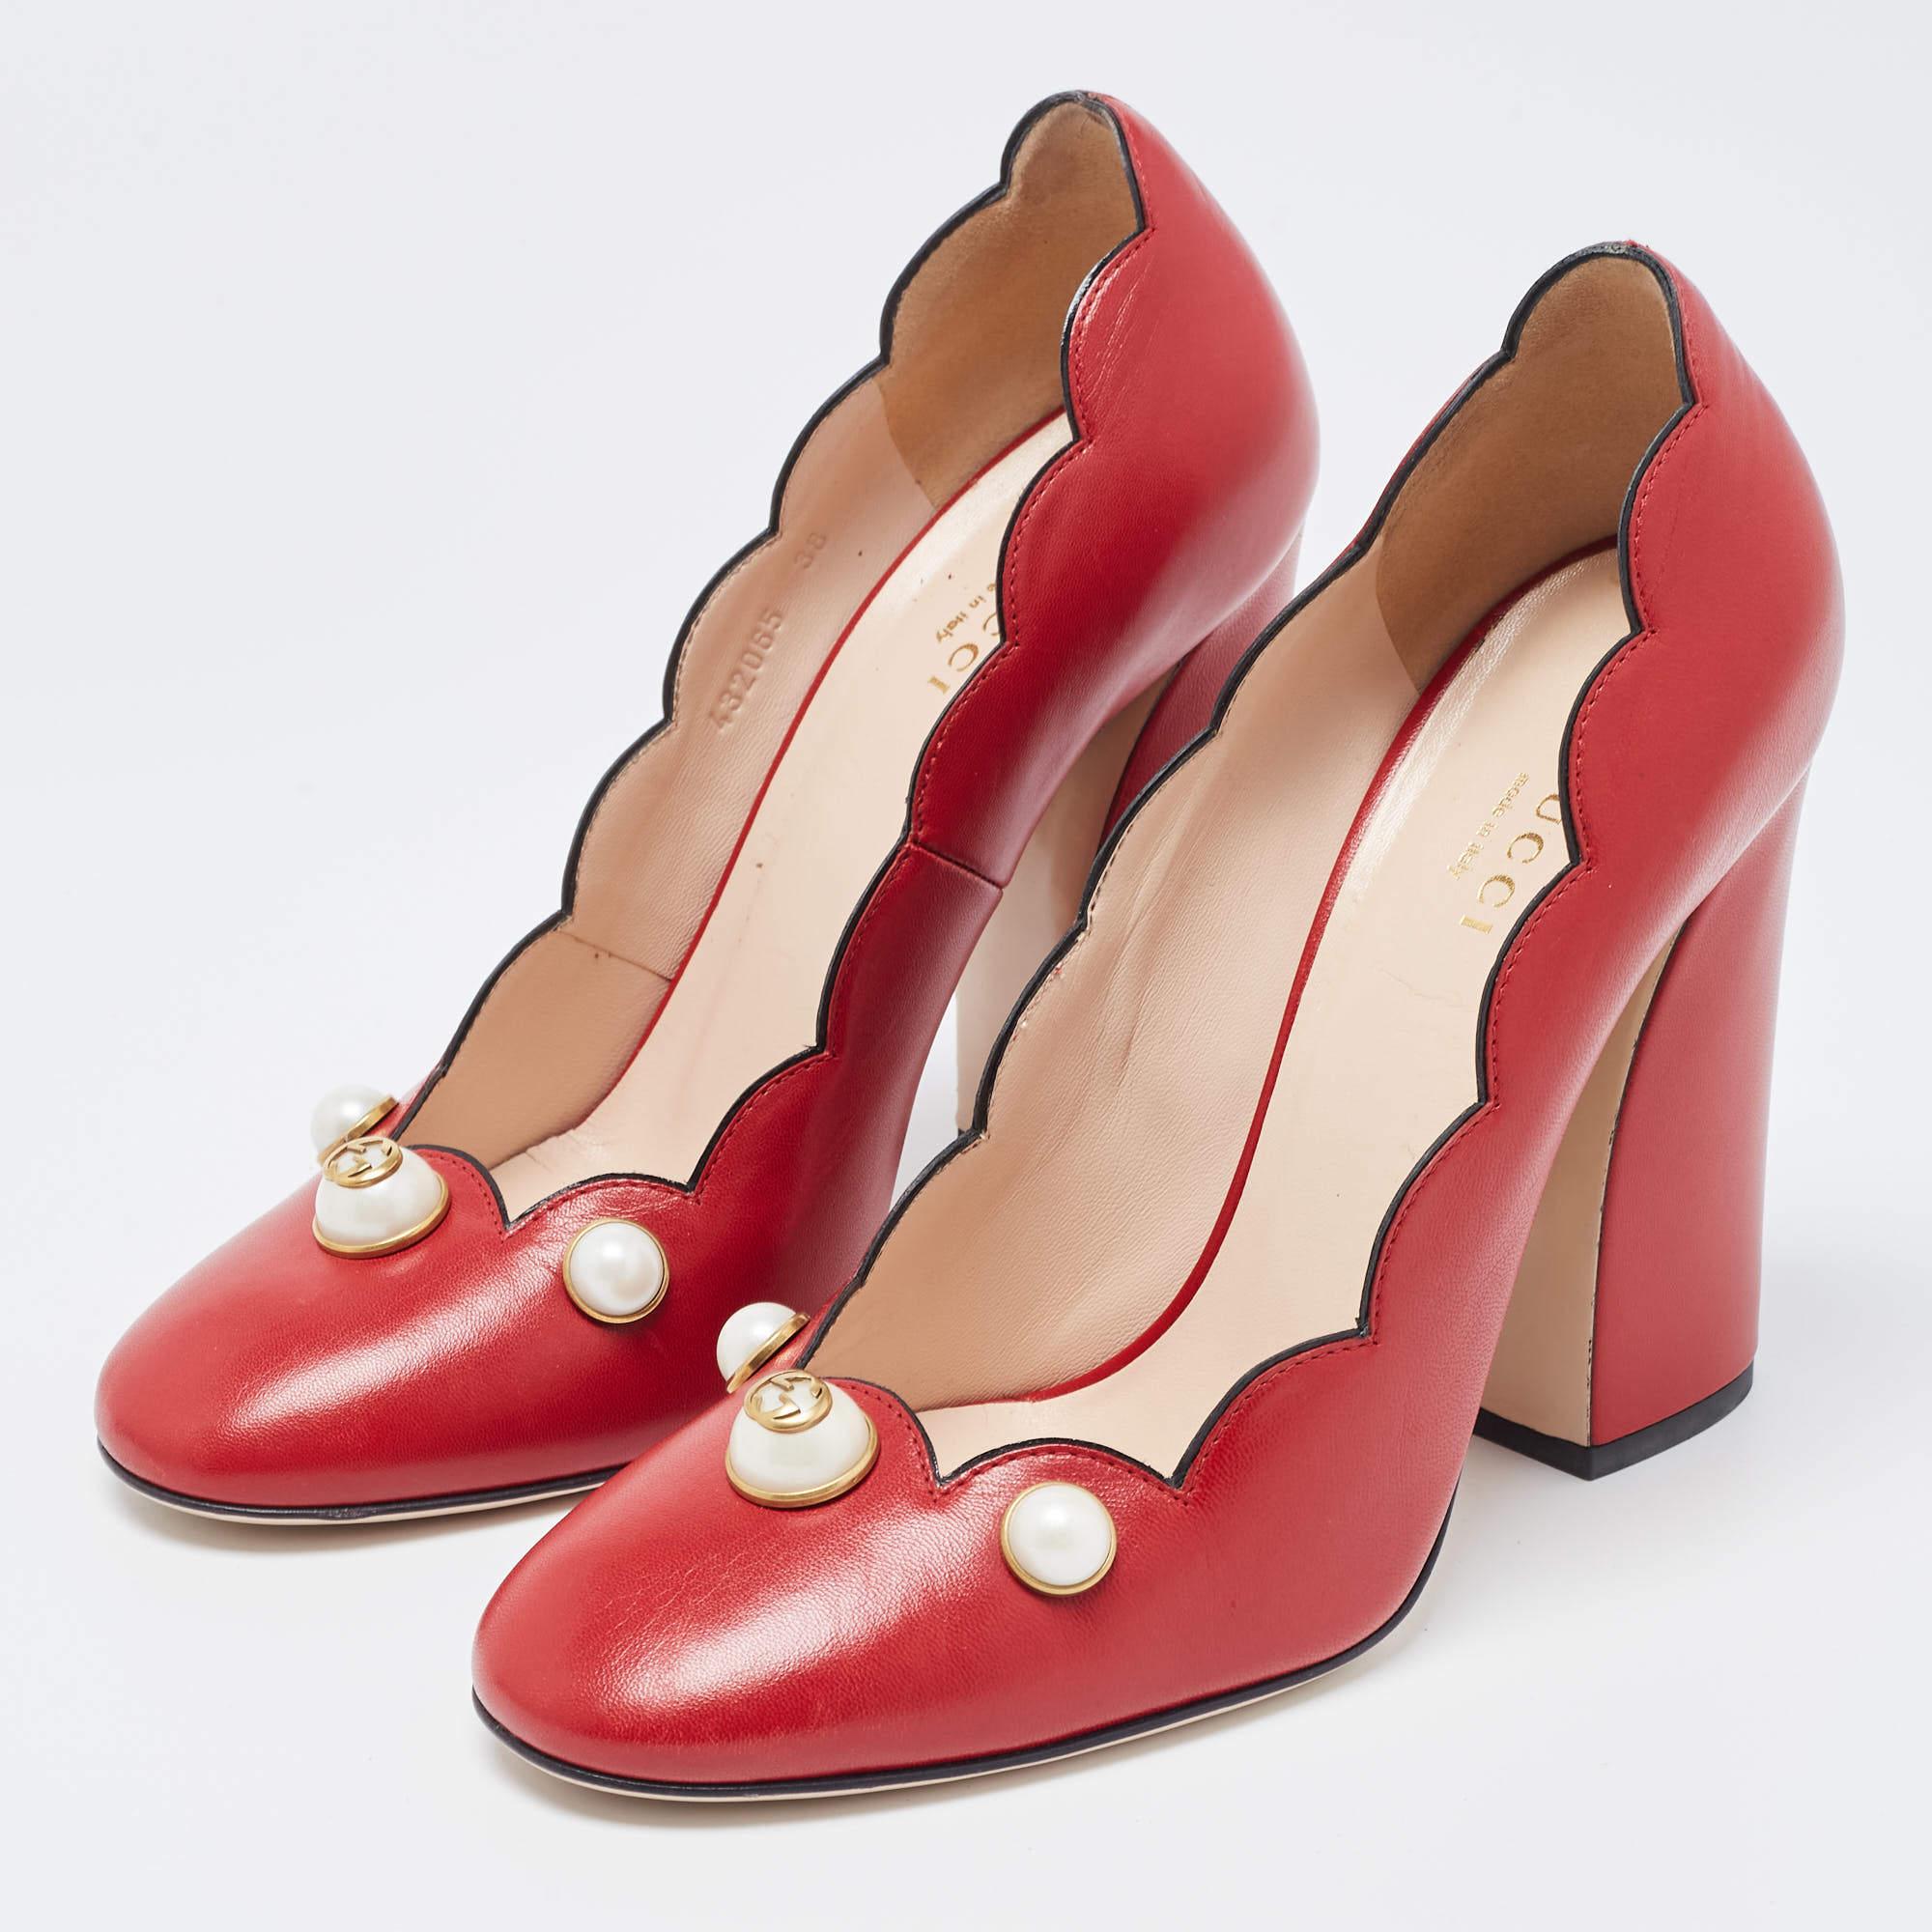 Gucci Red Leather Scalloped Willow Pearl Embellished Block Heel Pumps Size 38 In Good Condition For Sale In Dubai, Al Qouz 2